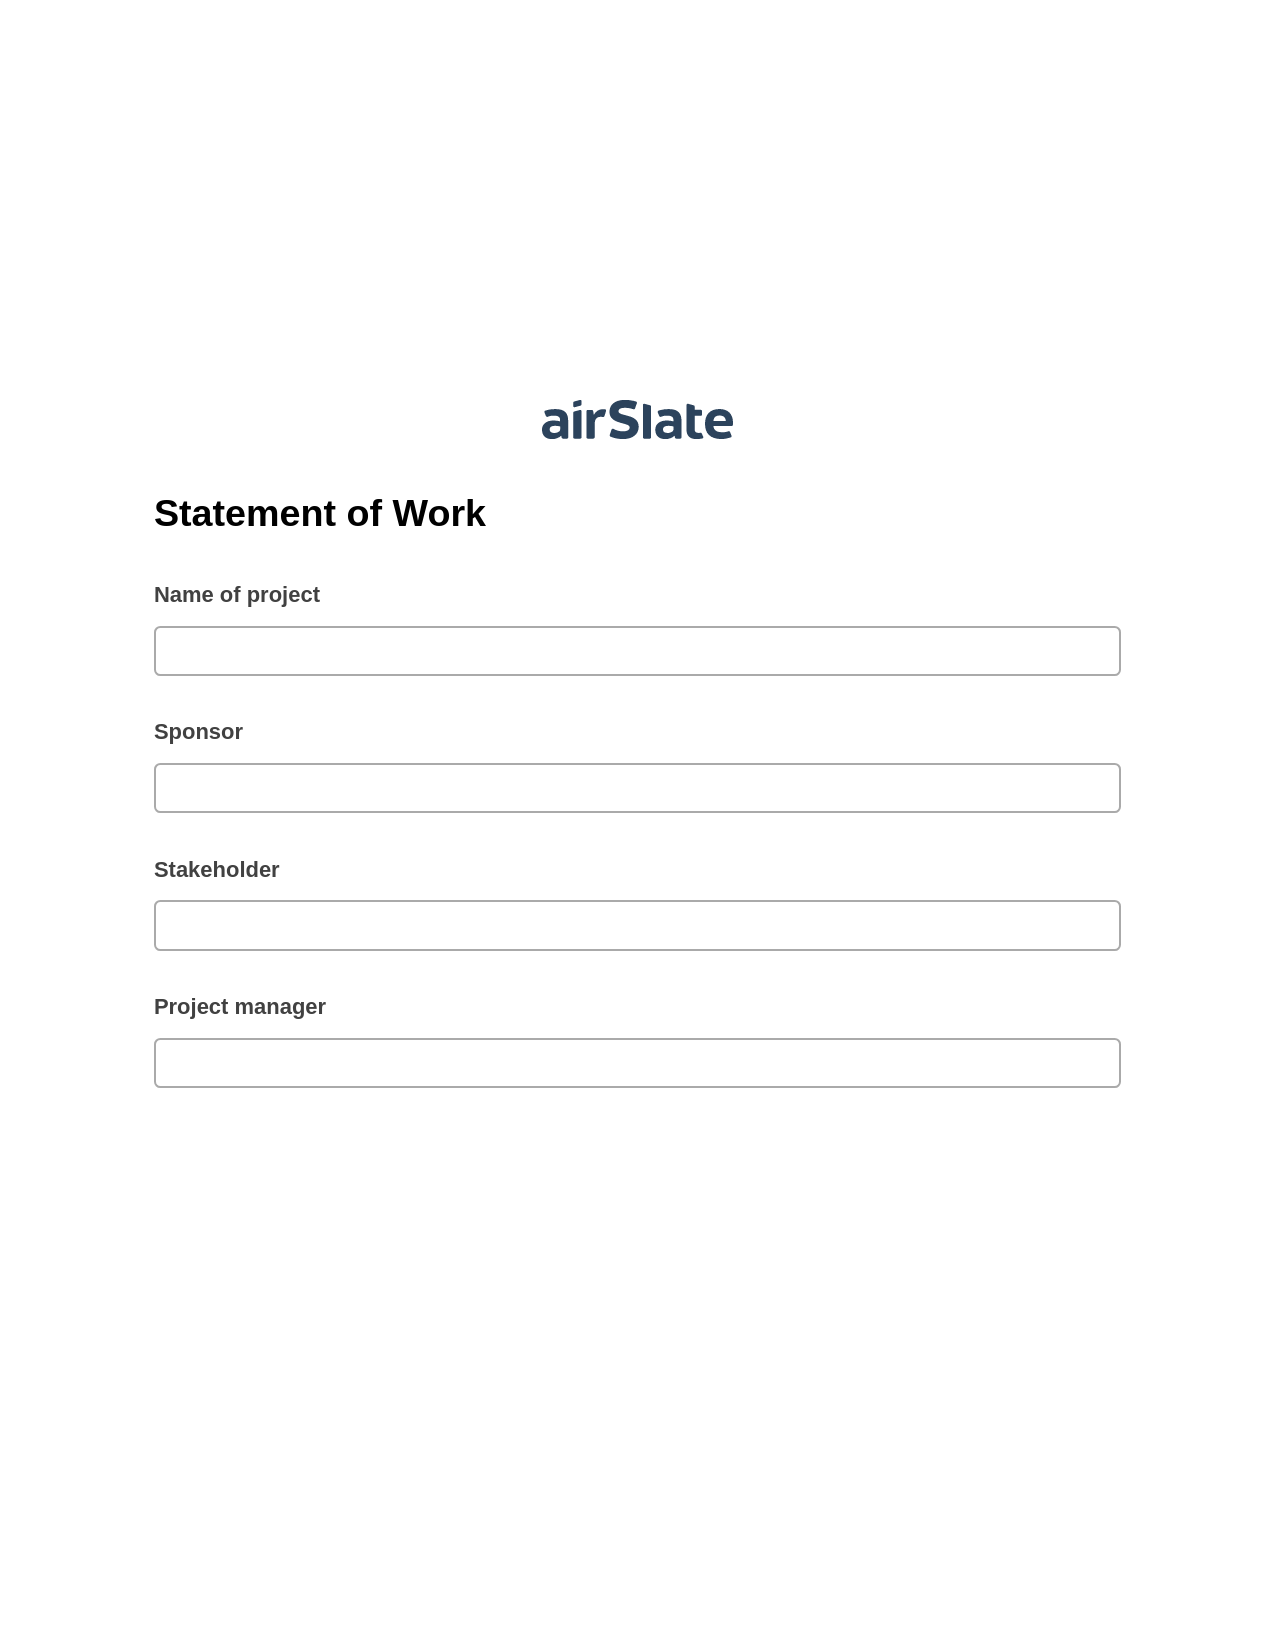 Statement of Work Pre-fill Dropdown from Airtable, Document Hide Bot, Export to Google Sheet Bot